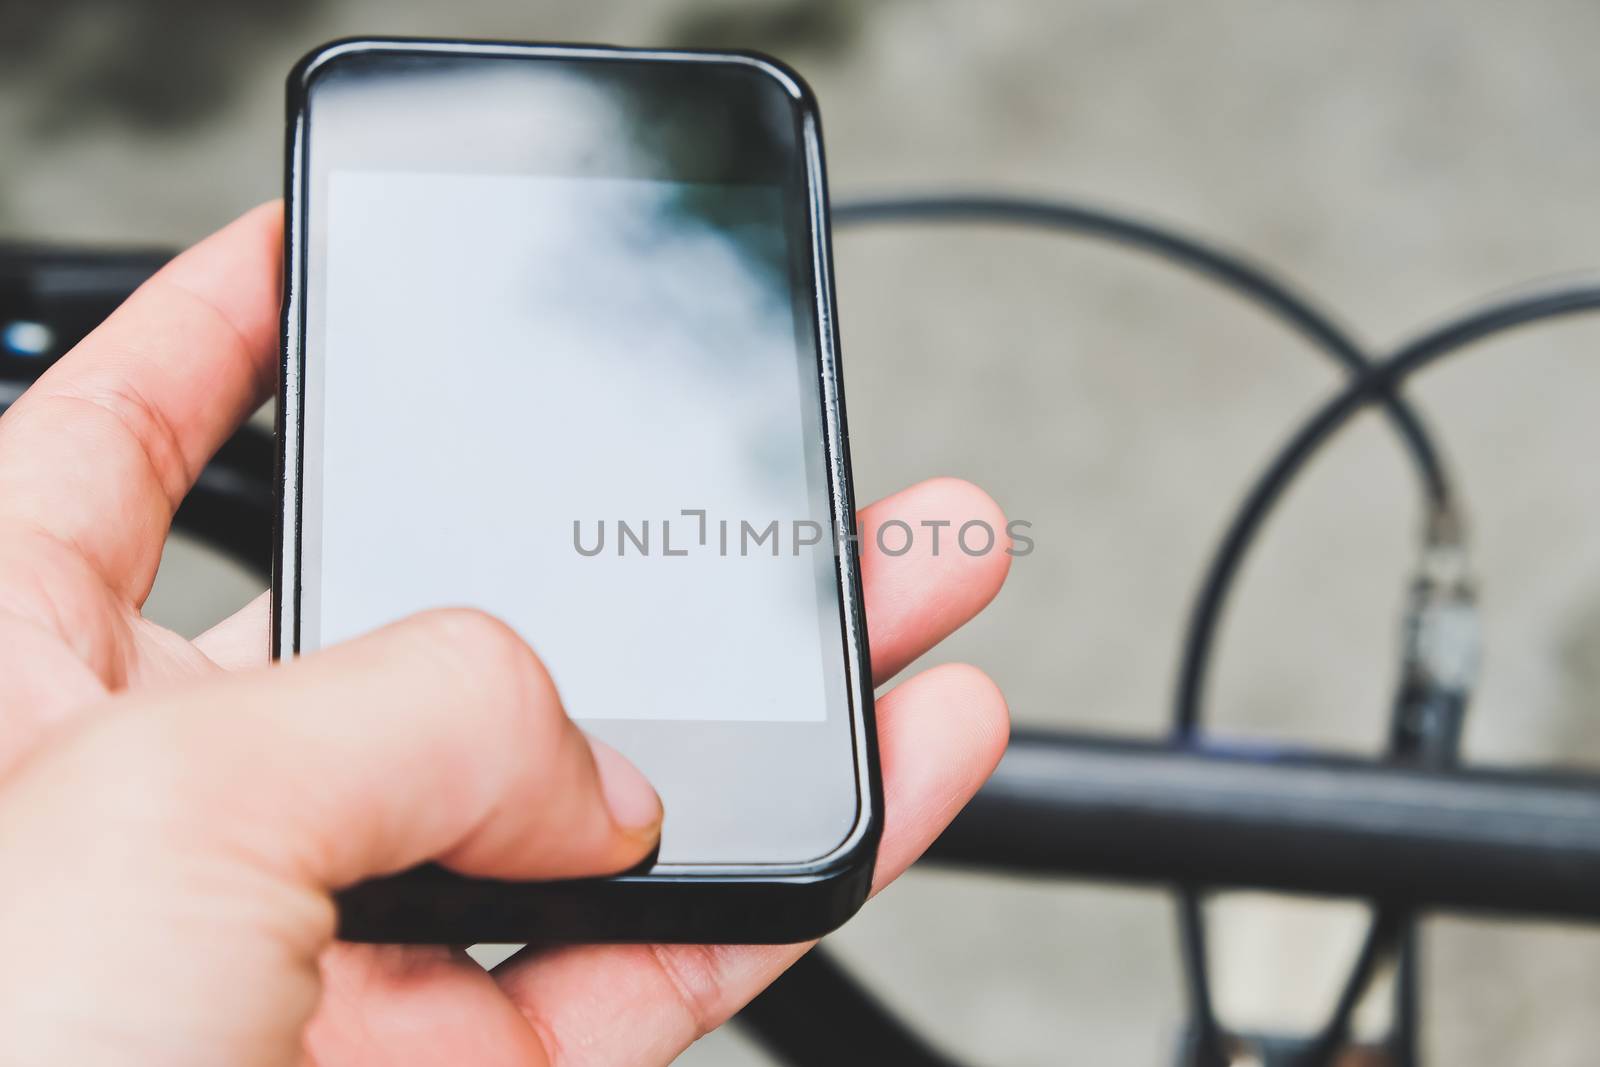 Close up image of man hand with bicycle texting on mobile phone